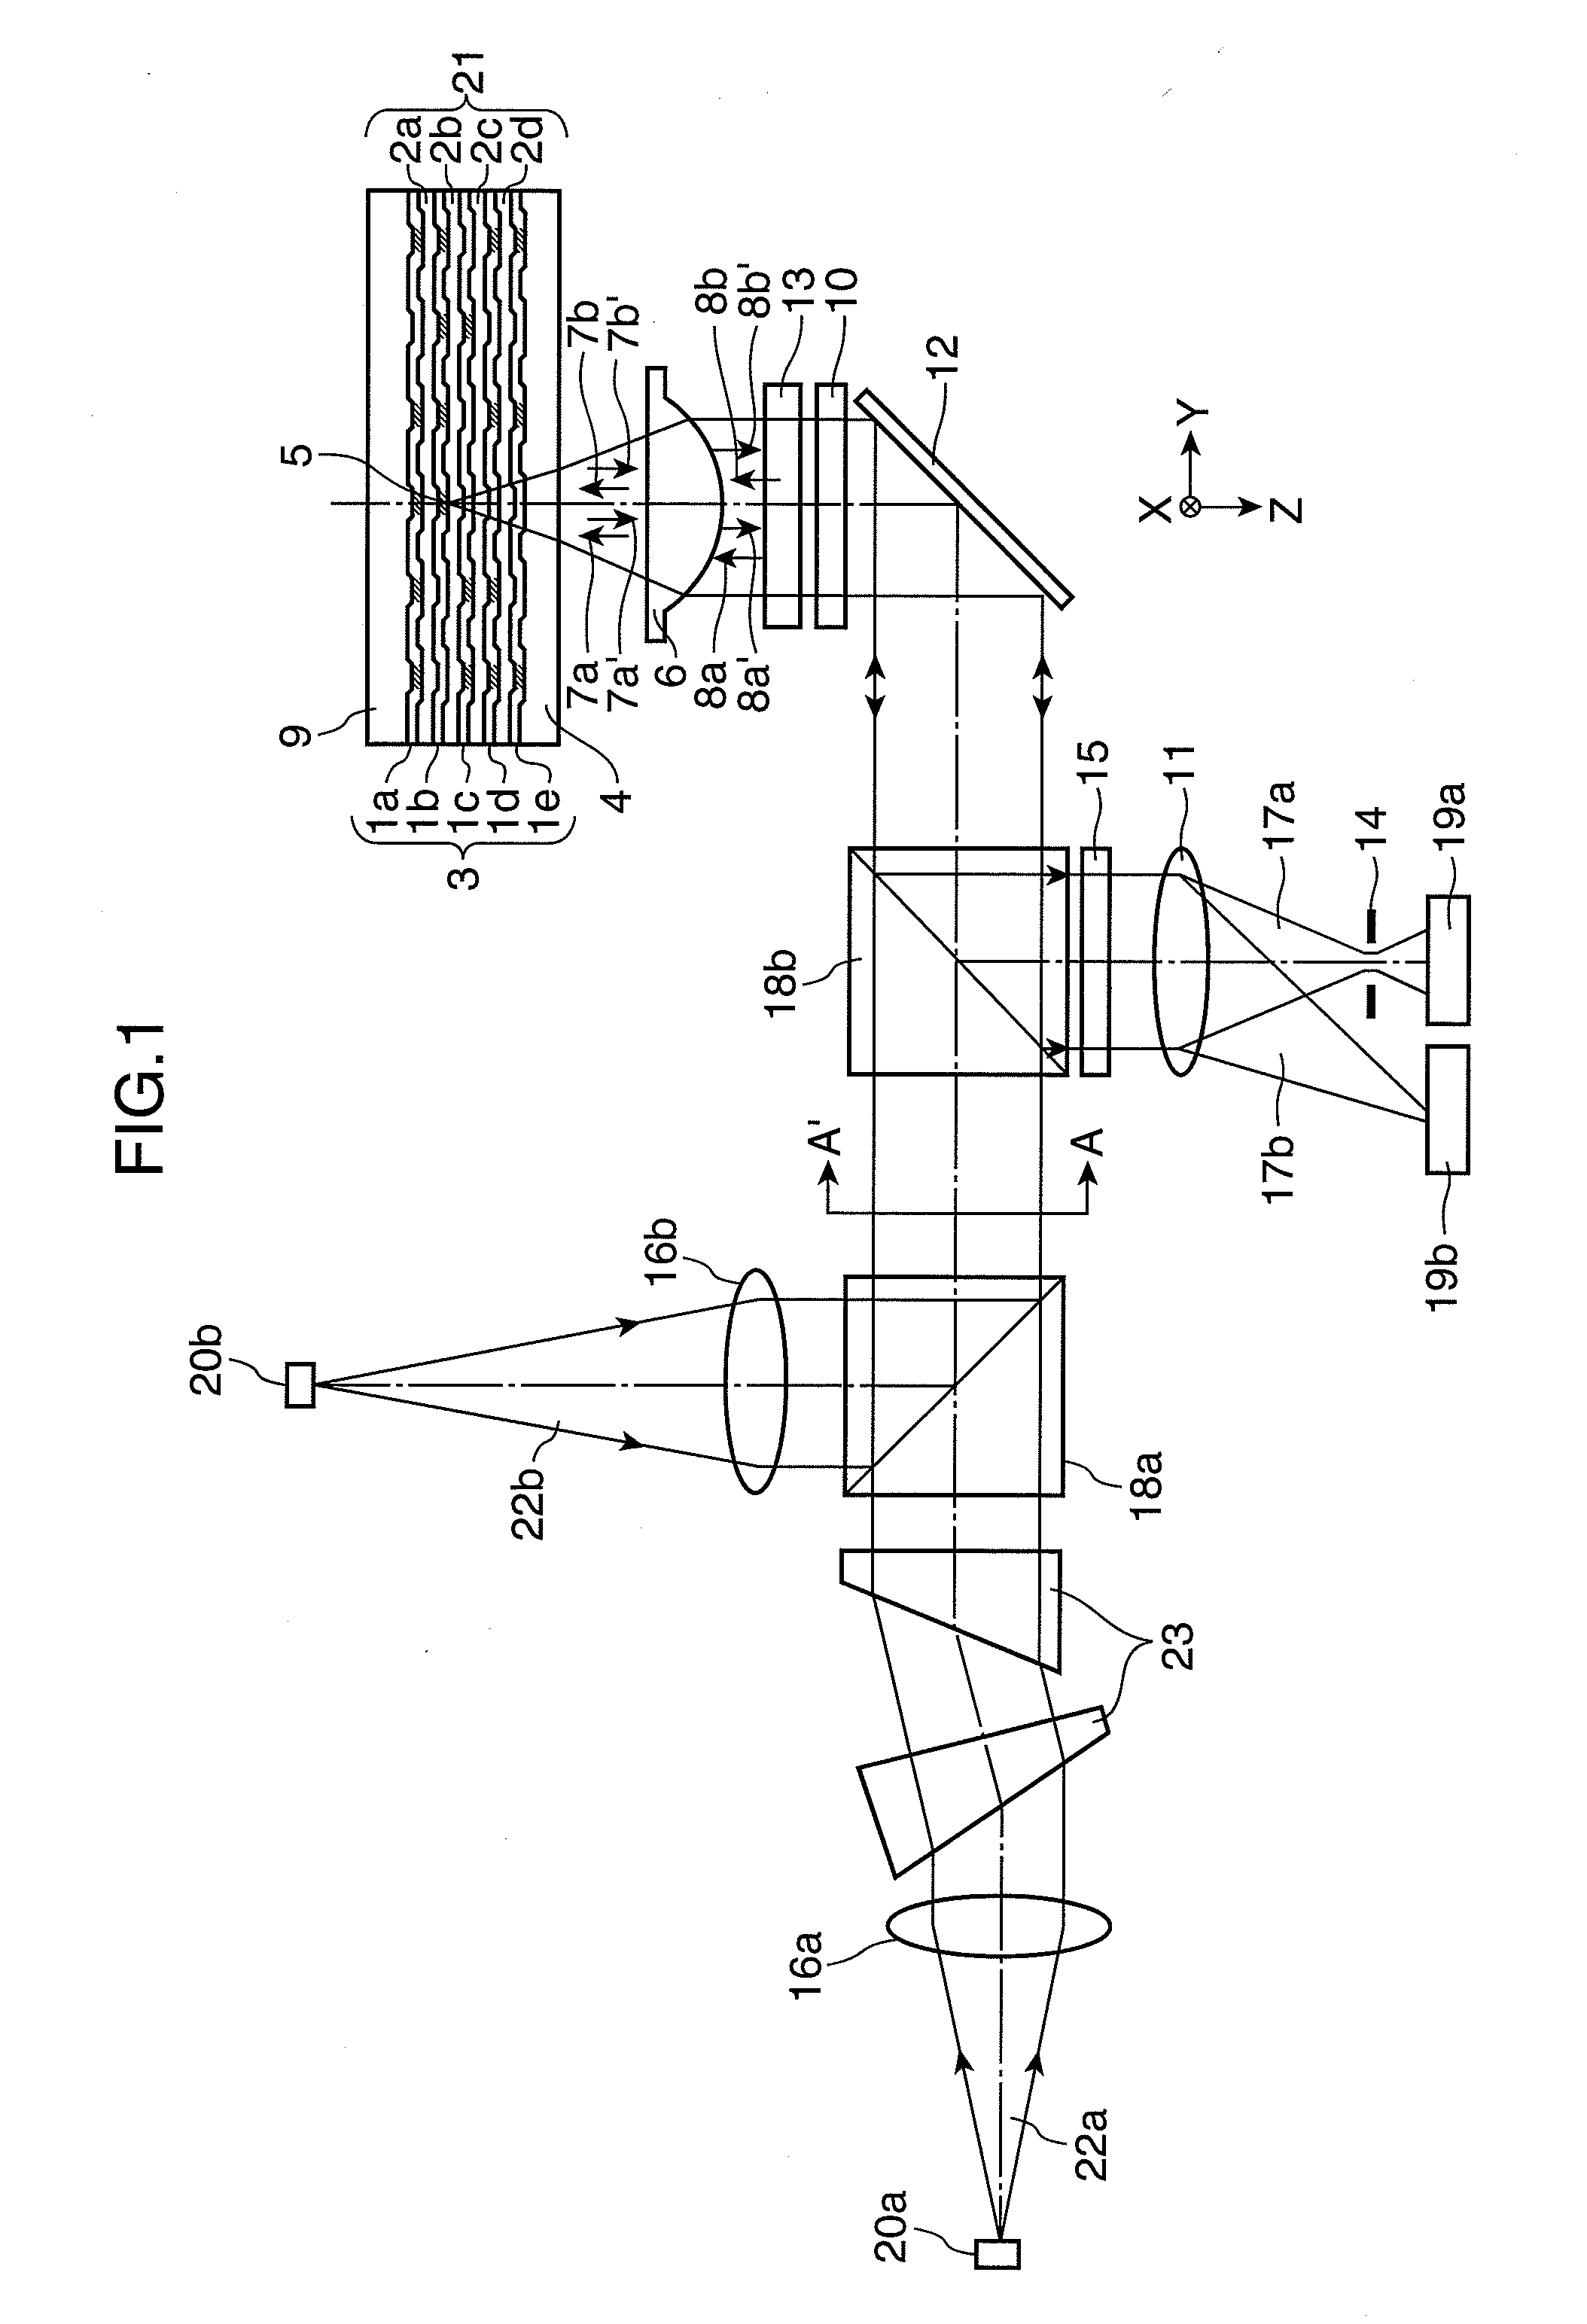 Optical information recording/reproducing device